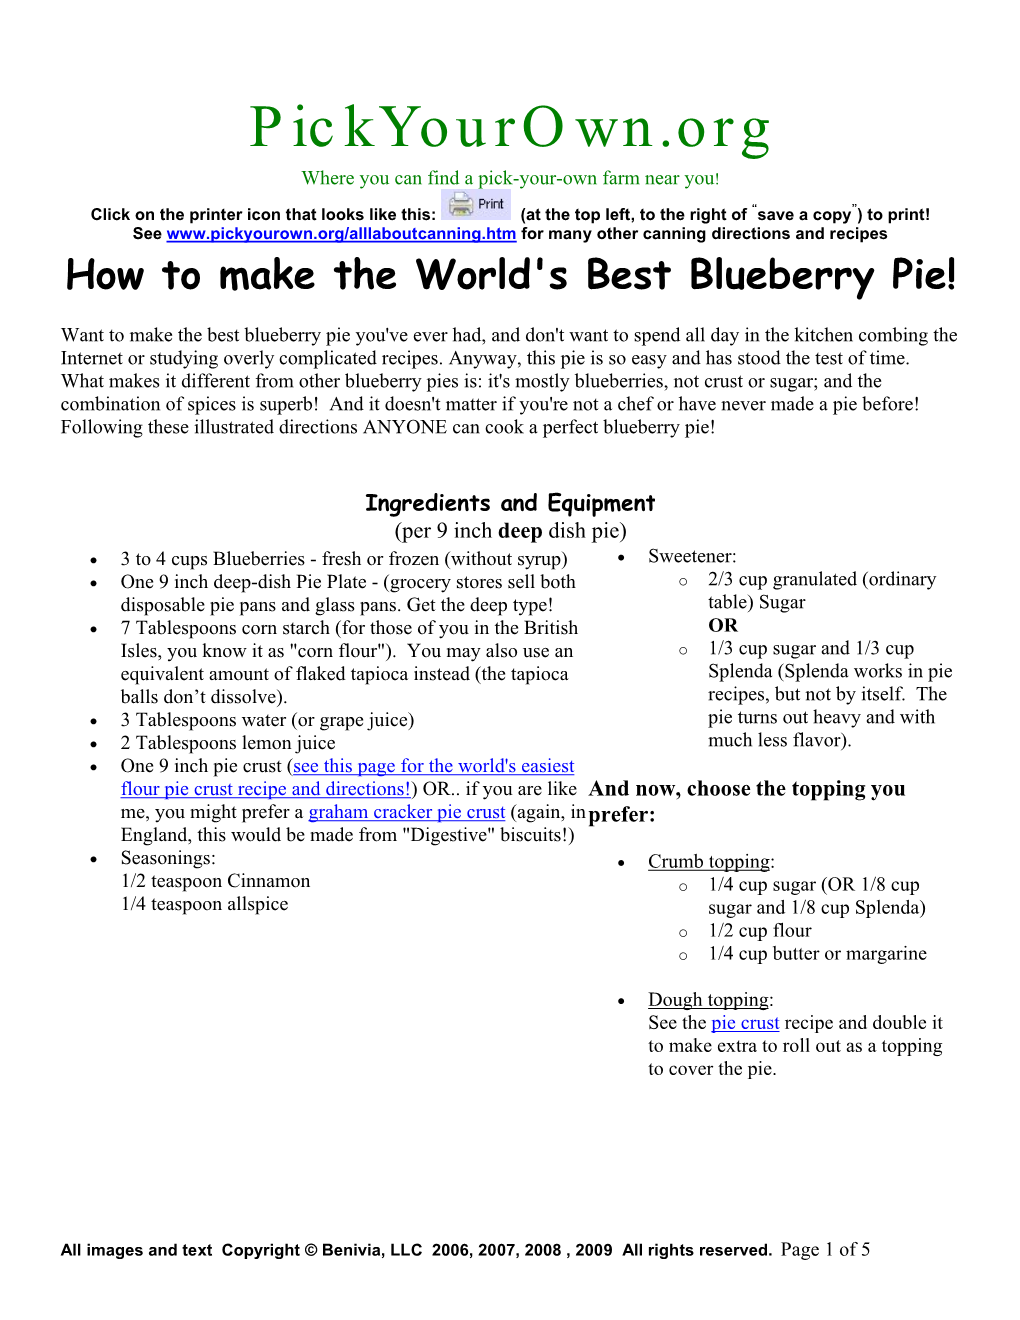 How to Make the World's Best Blueberry Pie!